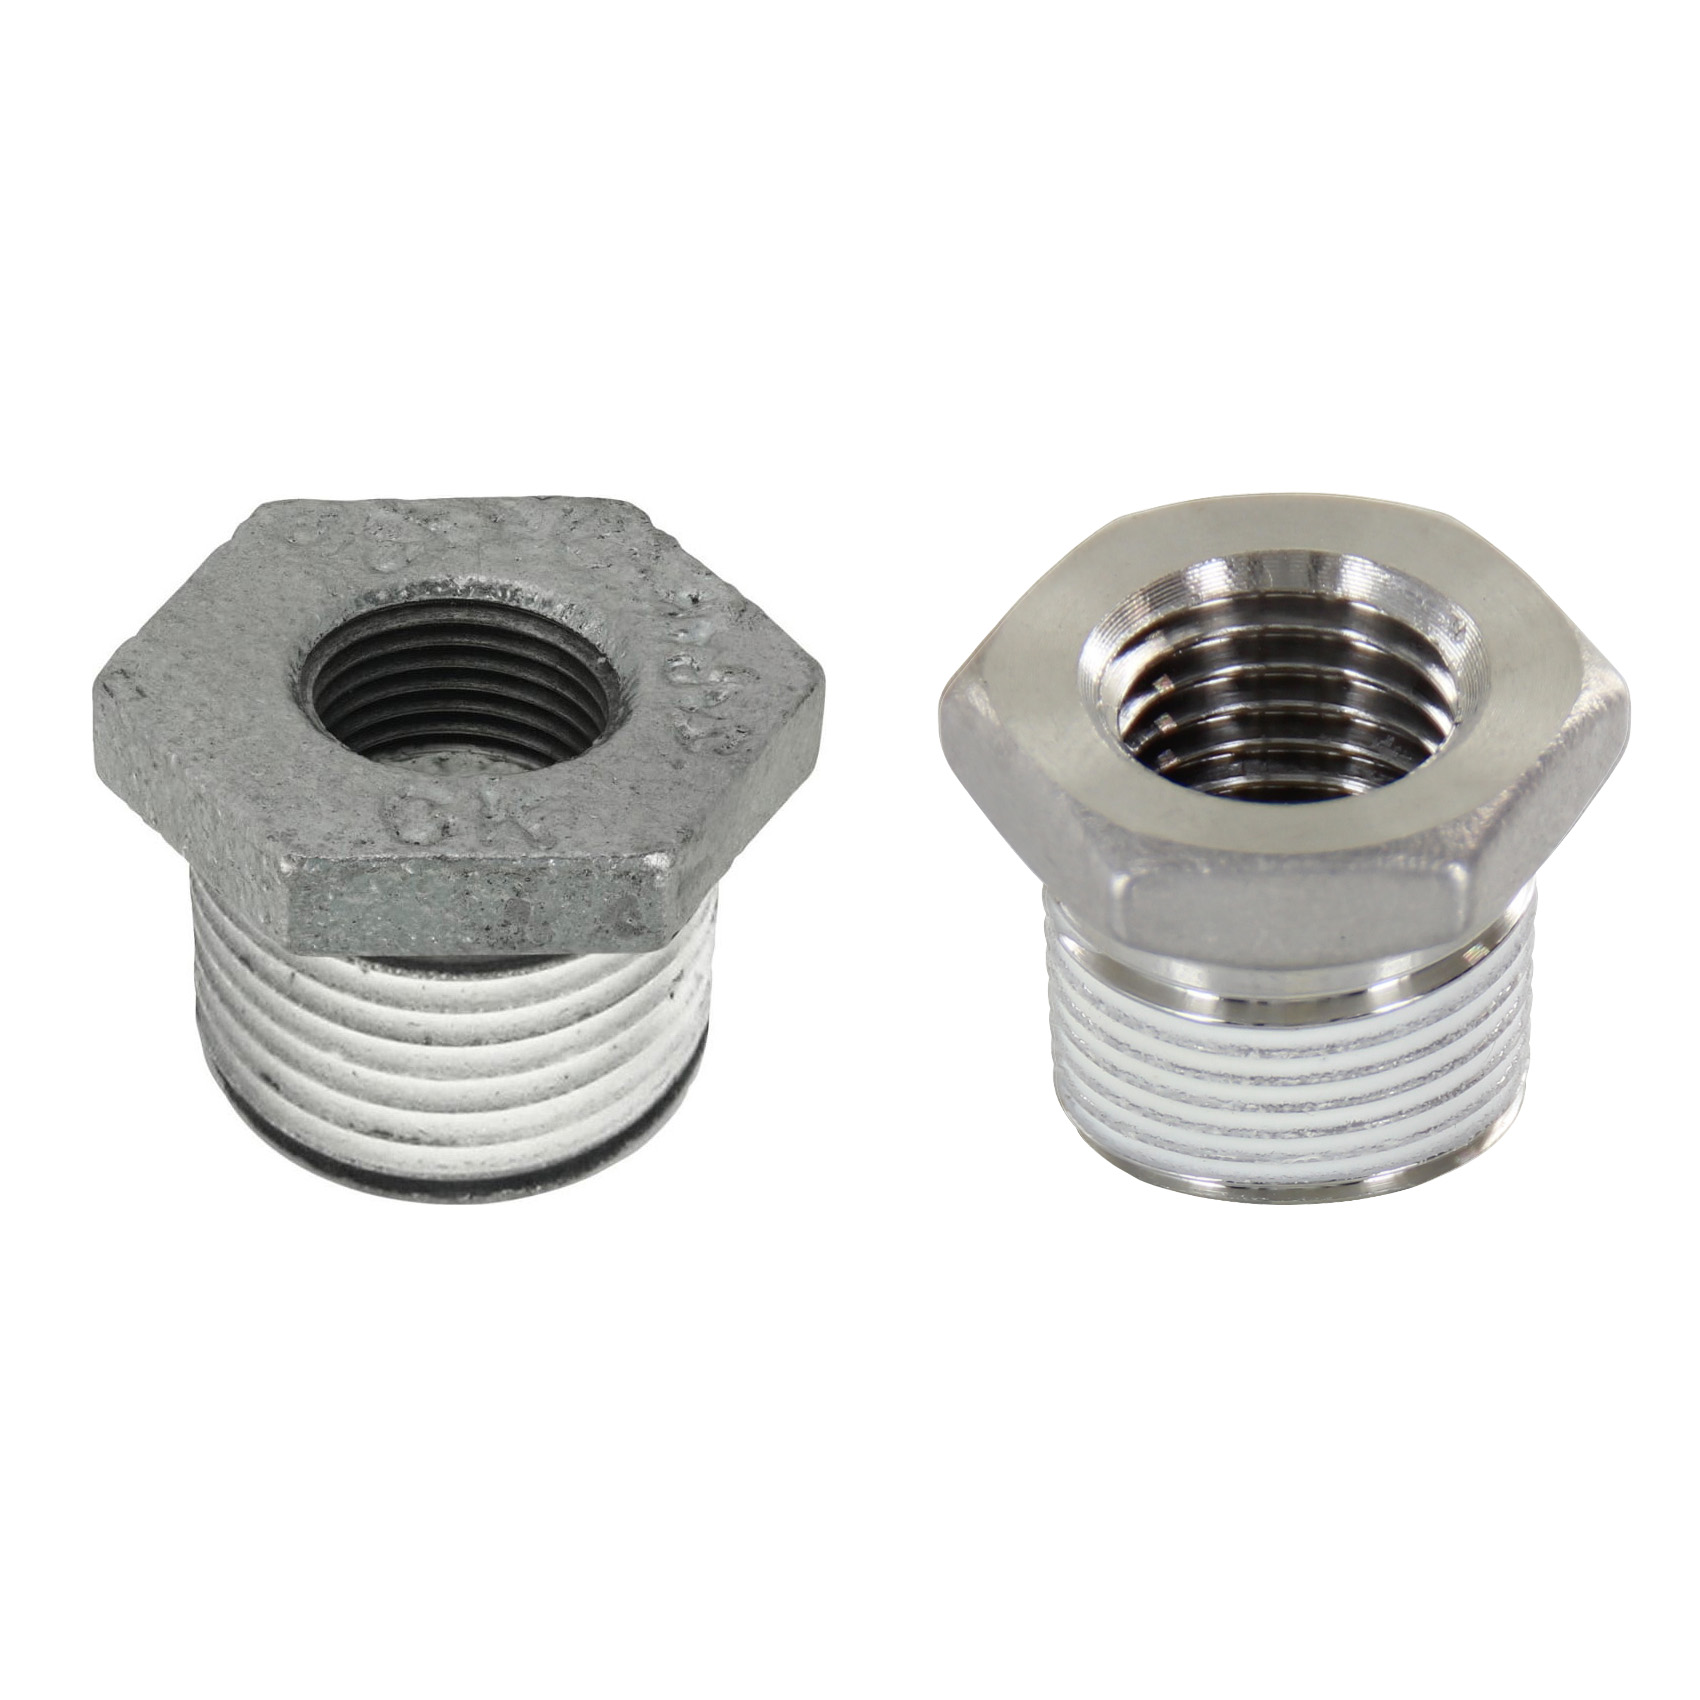 Low Pressure Fittings / With Seal Coating / Bushing SGCPB23